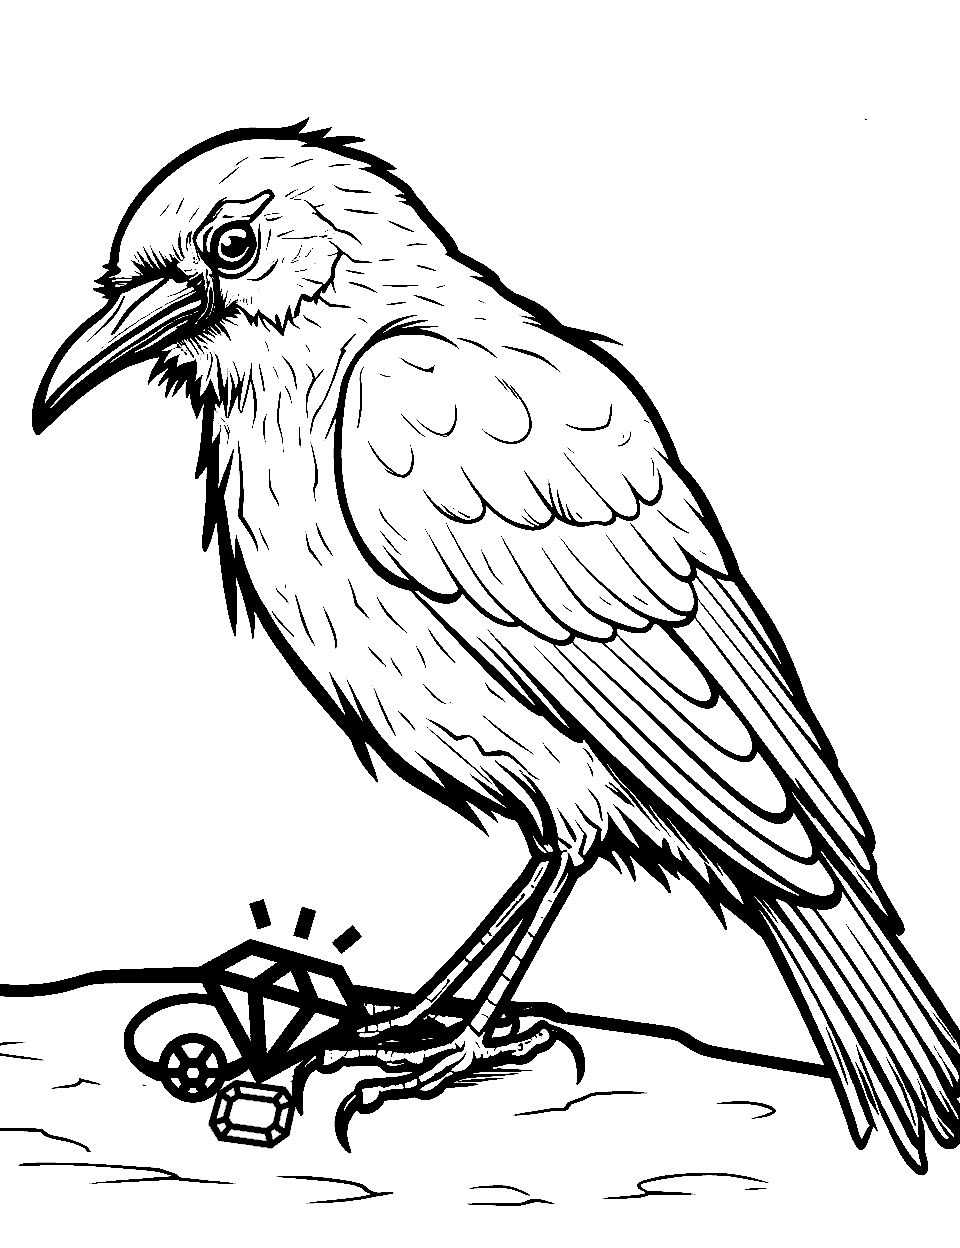 Crow's Mischief Coloring Page - A crow cheekily looking at shiny objects on the ground.